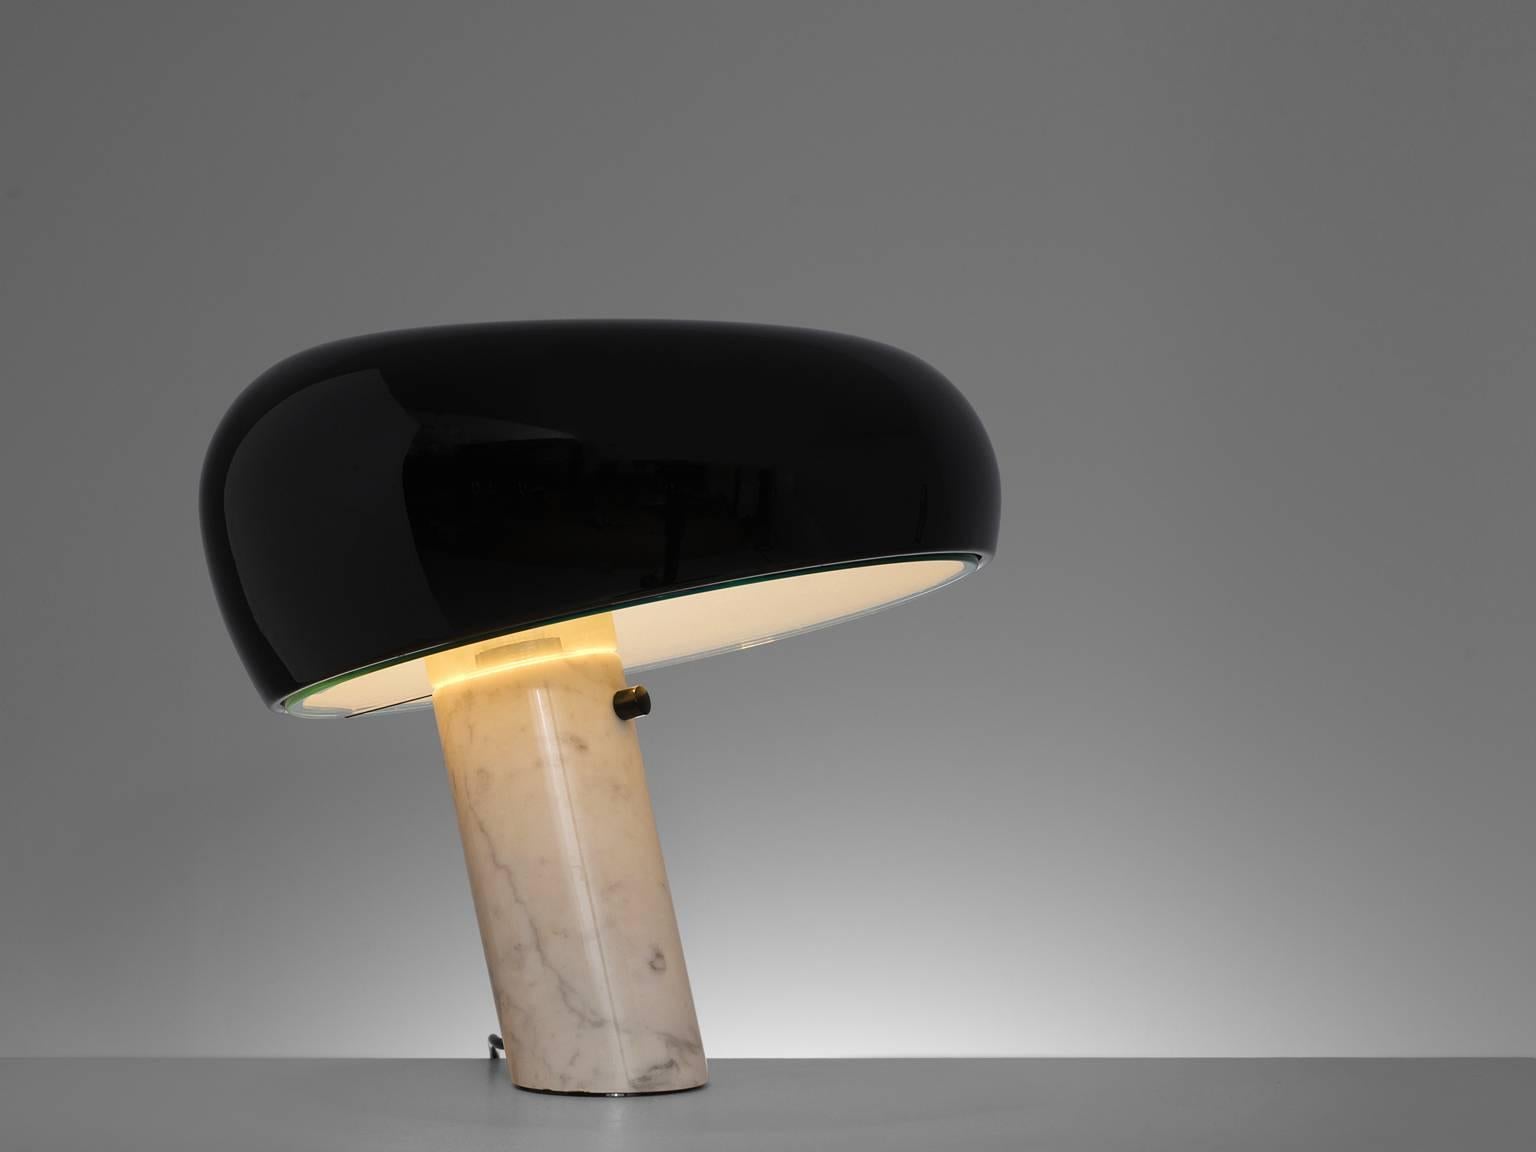 Achille & Pier Giacomo Castiglioni 'Snoopy' table lamp for Flos, Italy, 1967

Table lamp with a white marble base and black metal top. The angled position of the base and the mushroom shapes shade give this piece a playful appearance. The lamp is